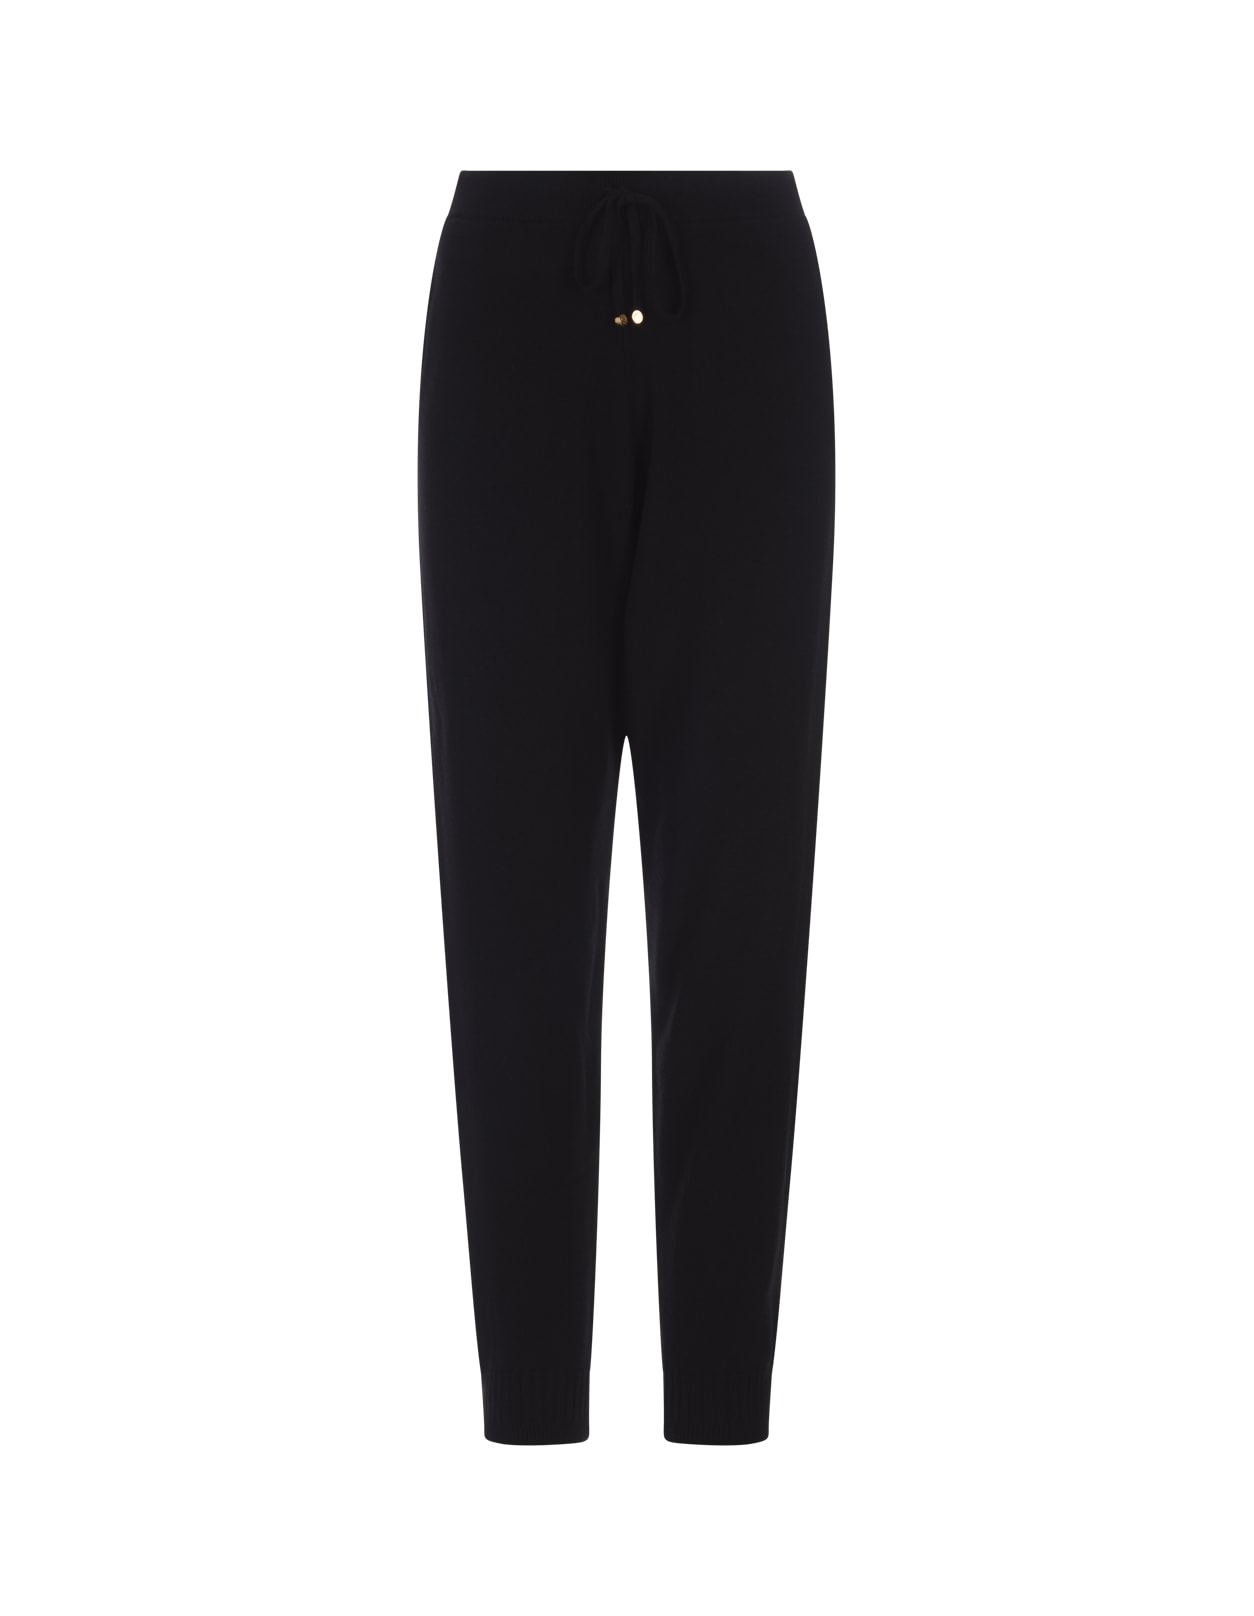 STELLA MCCARTNEY BLACK TROUSERS WITH ANKLES IN FINE KNIT STAR ICONIC